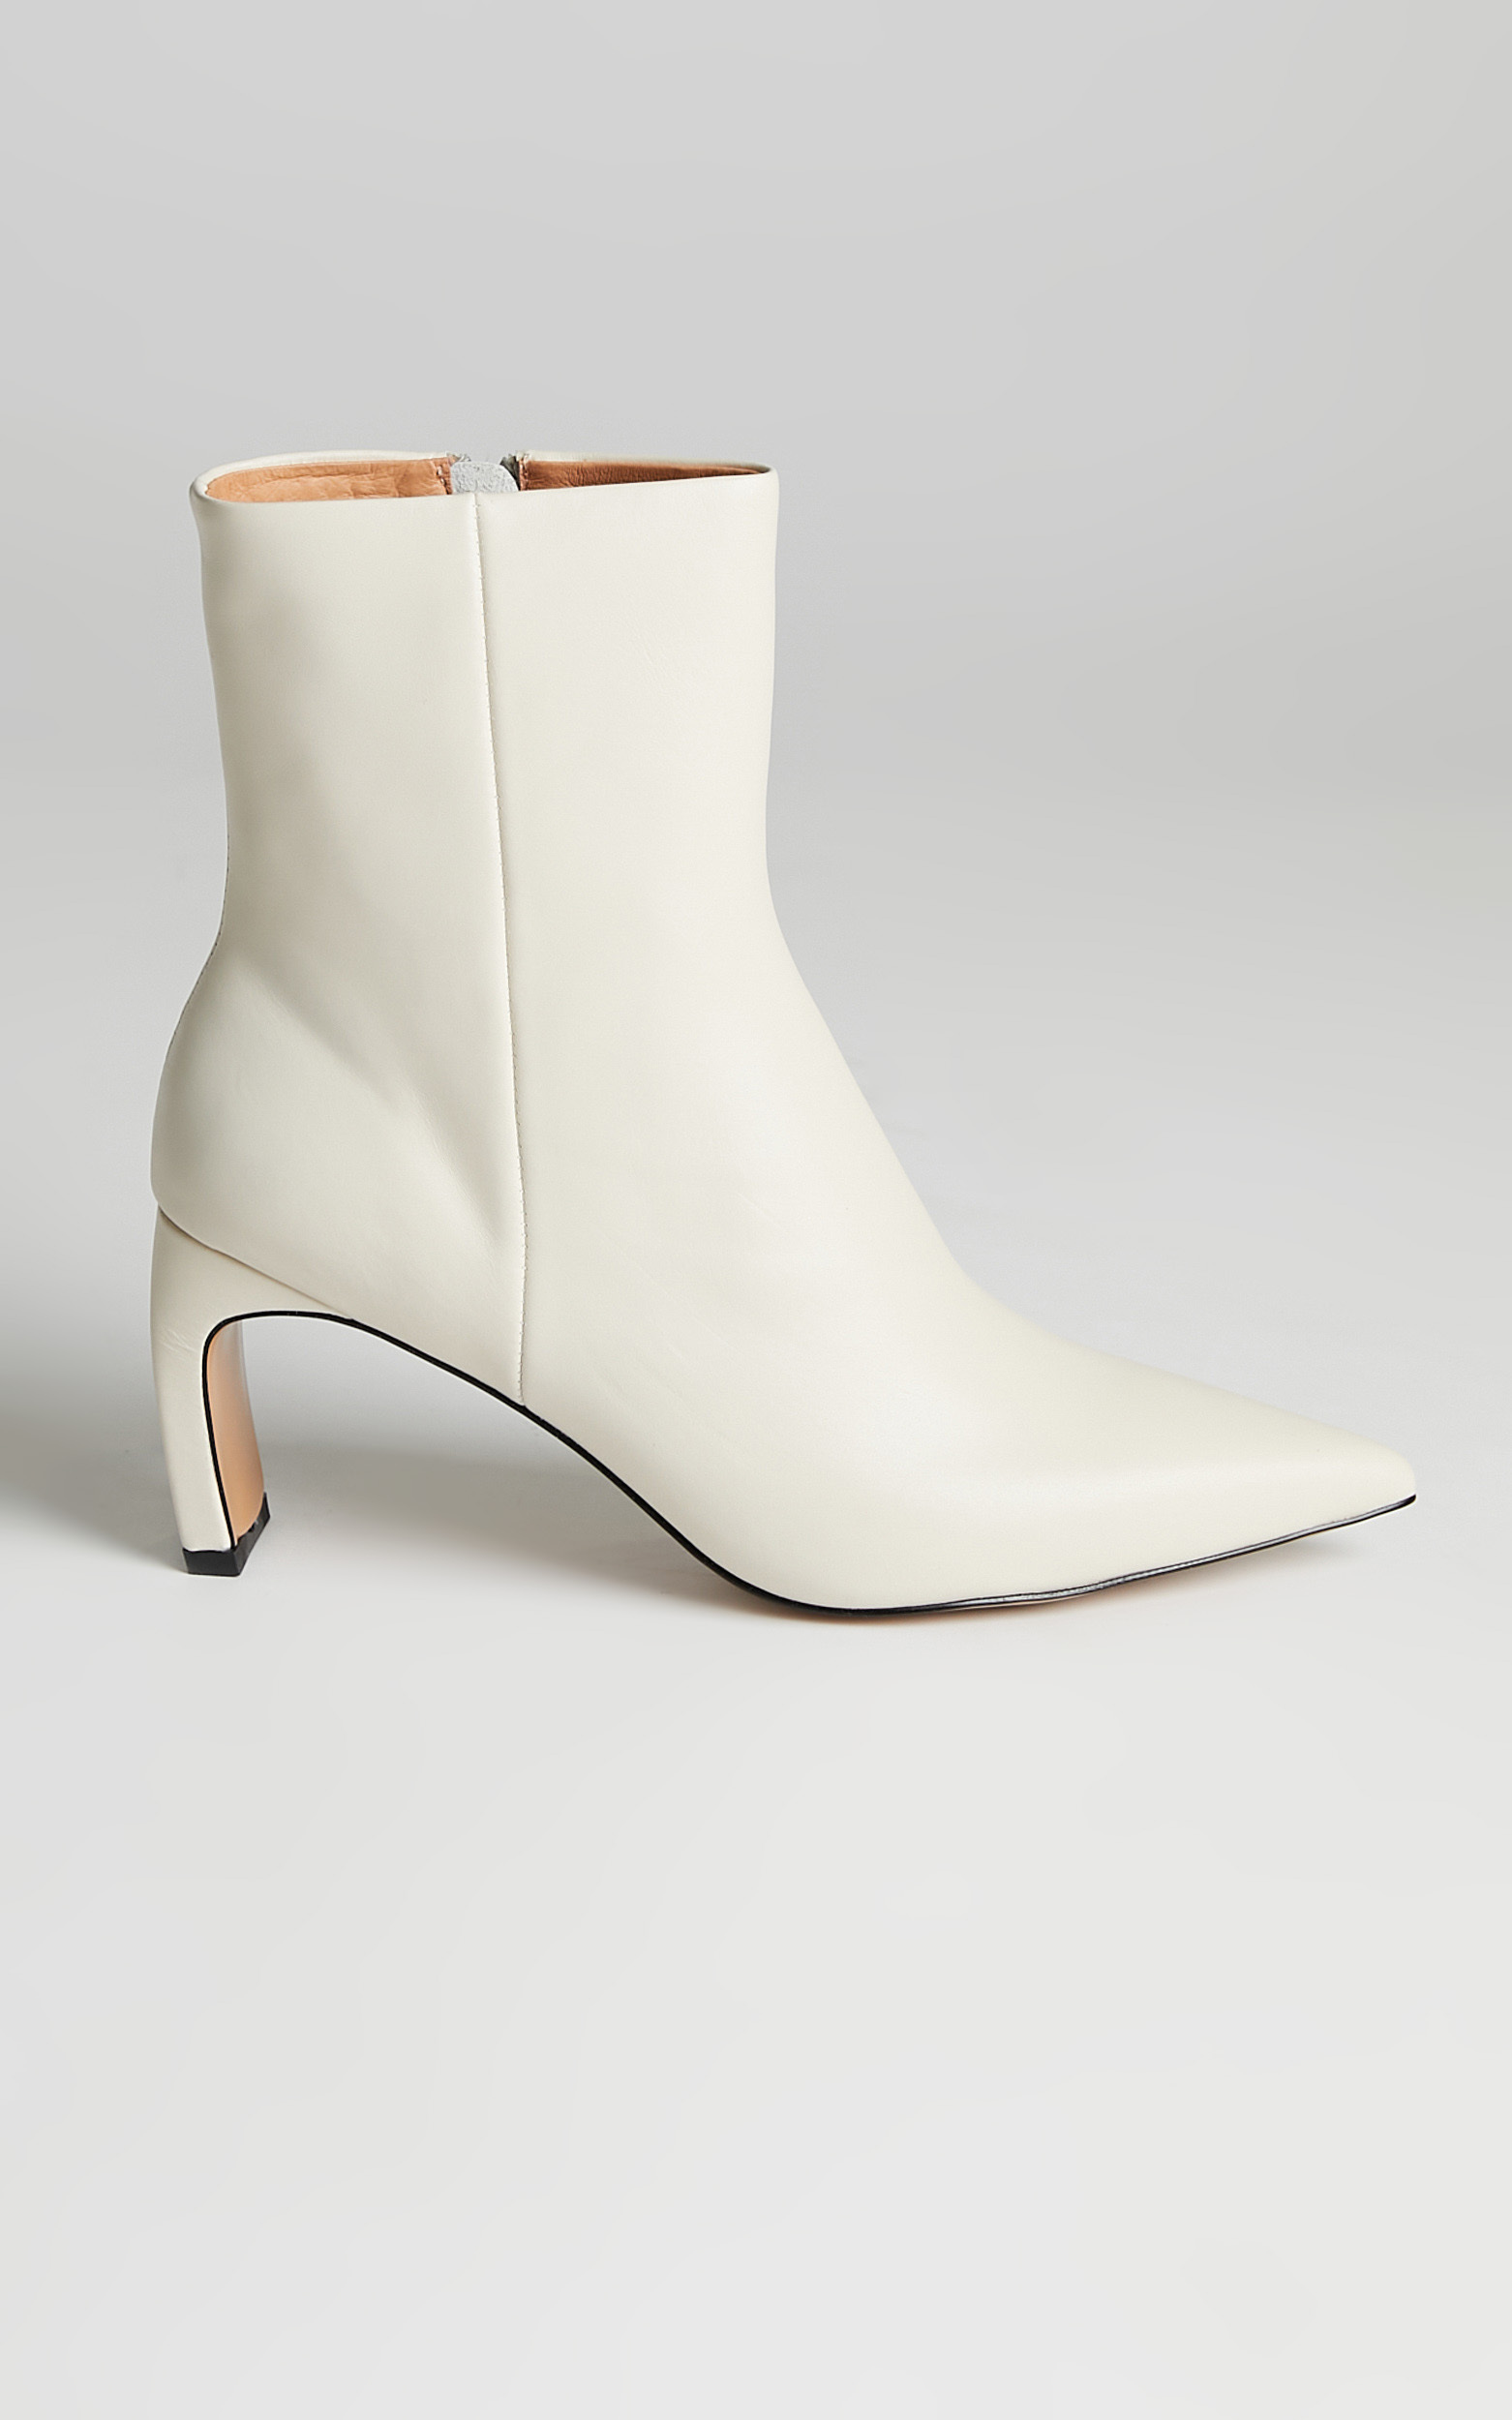 Alias Mae - Jameen Boots in Bone Leather - 10.5, WHT2, hi-res image number null